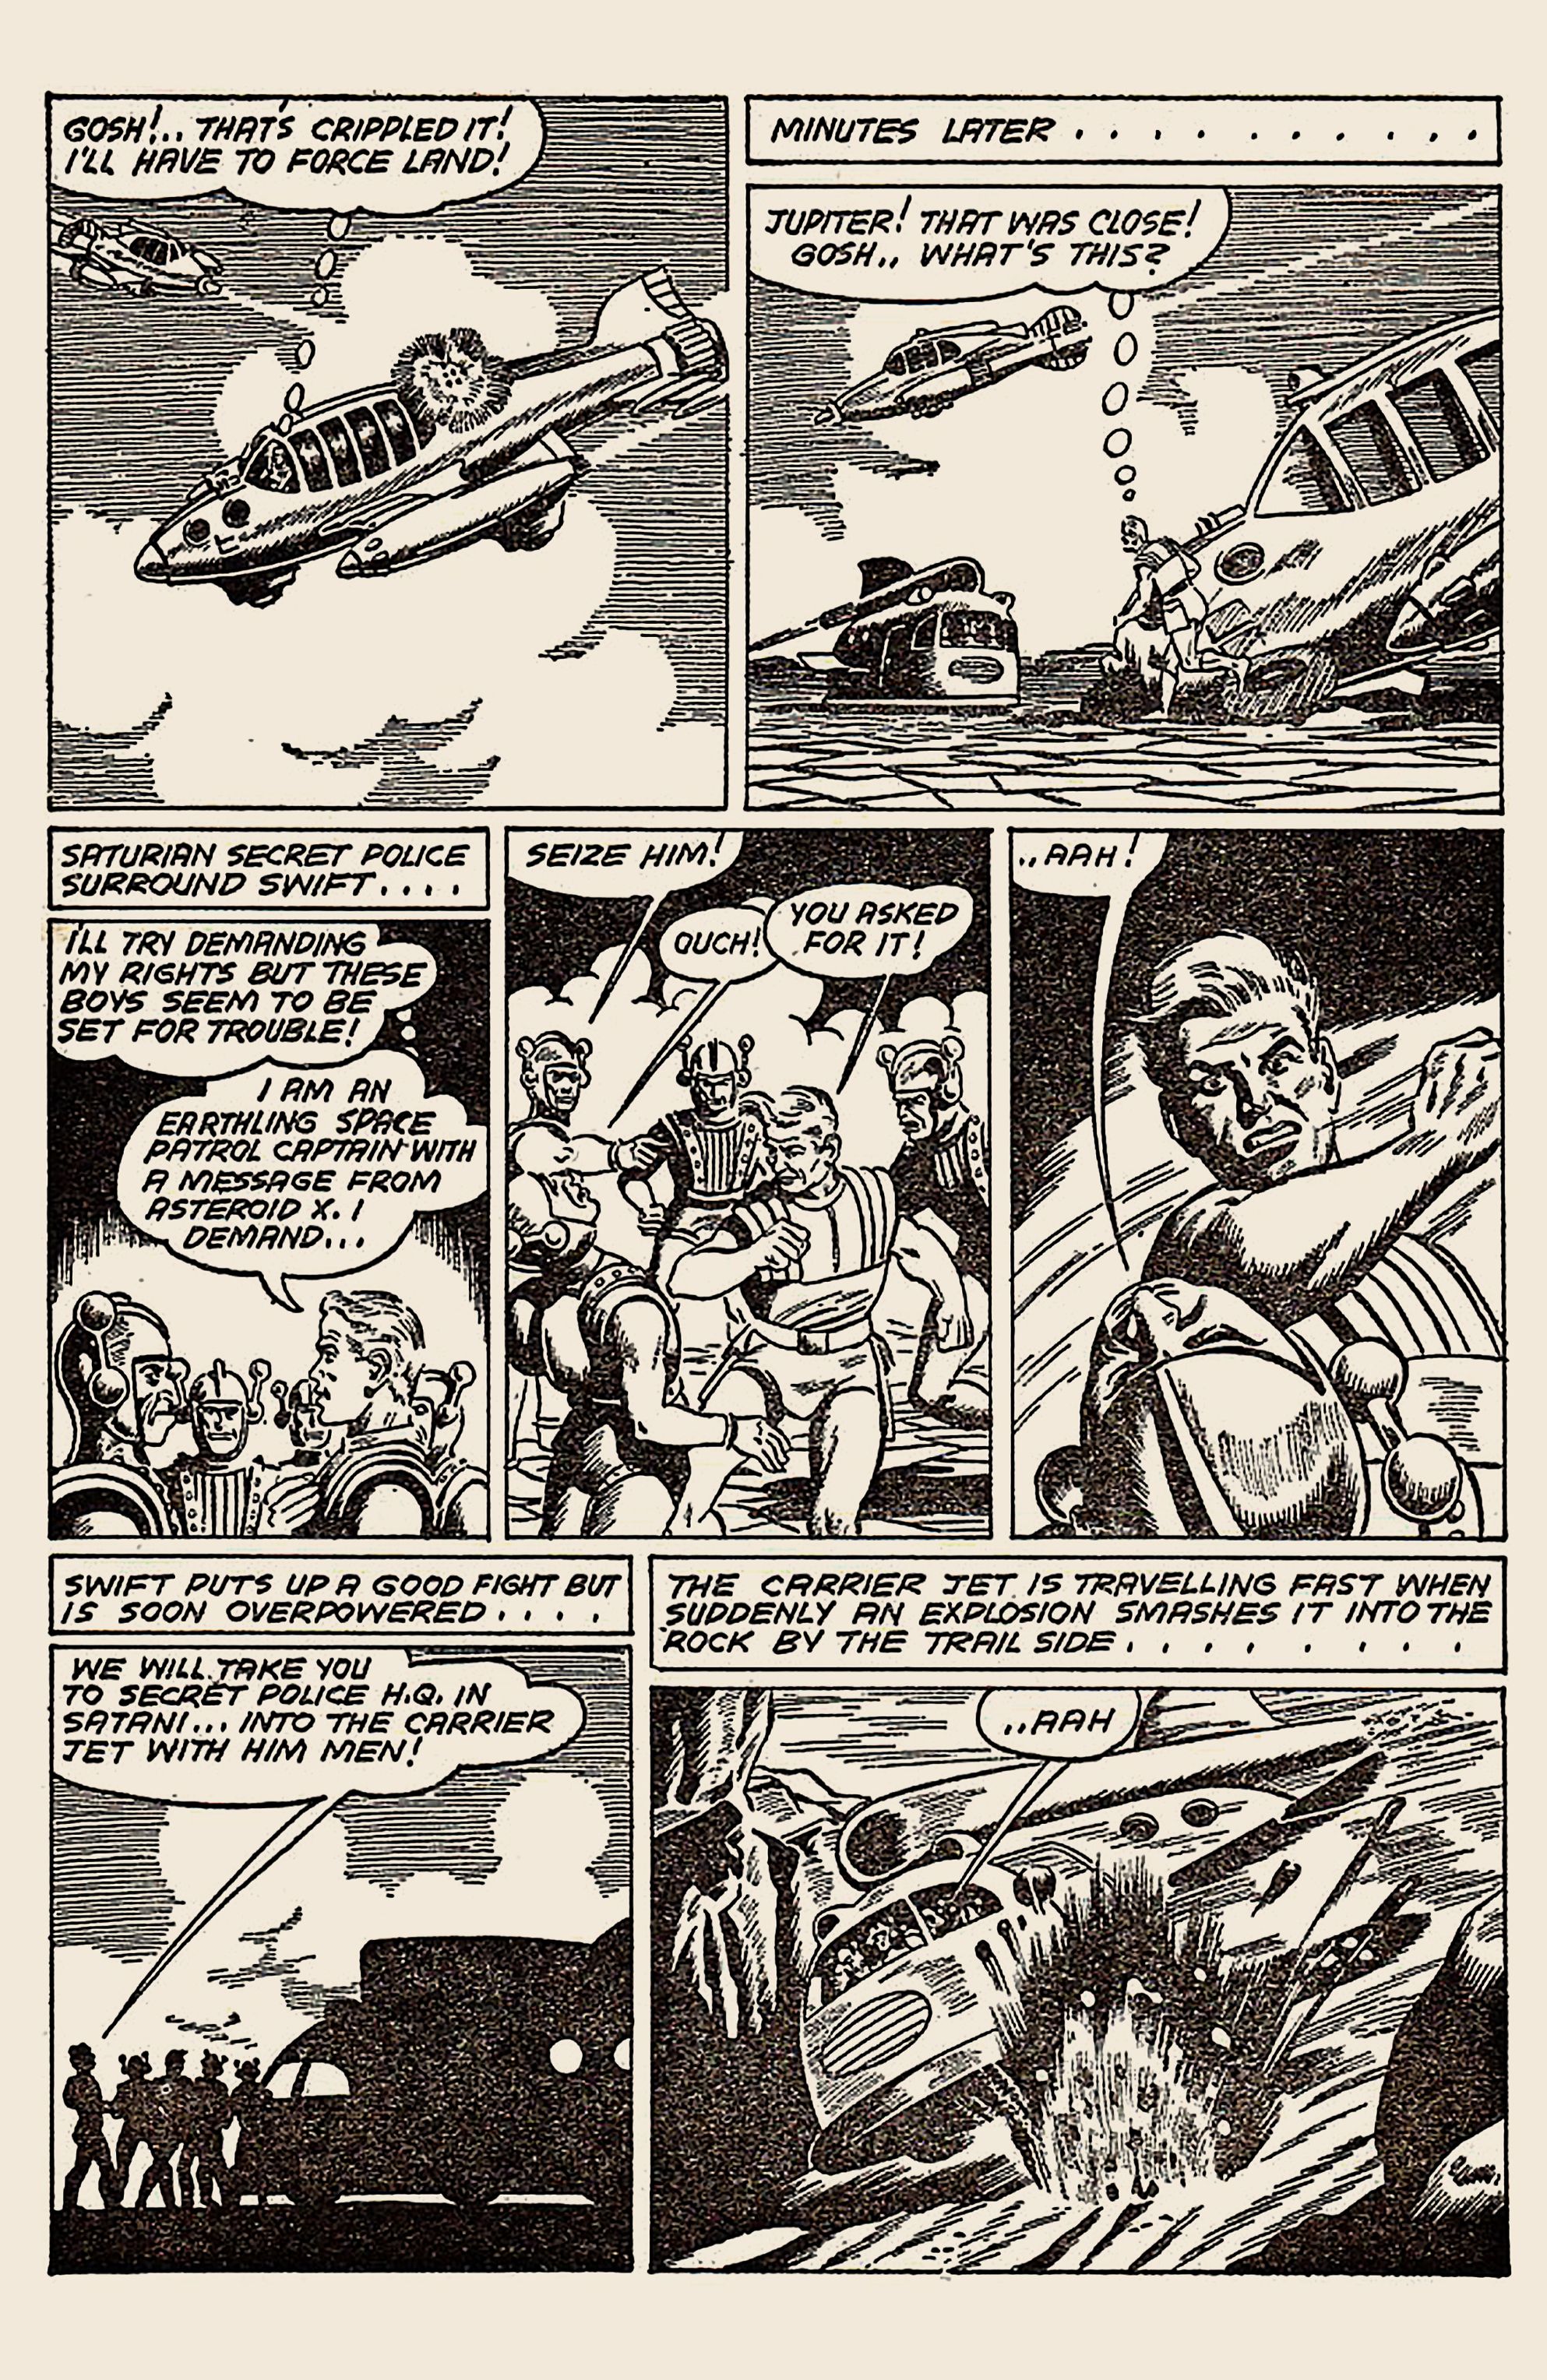 Read online J. Werner presents Classic Pulp comic -  Issue # Robots - 20